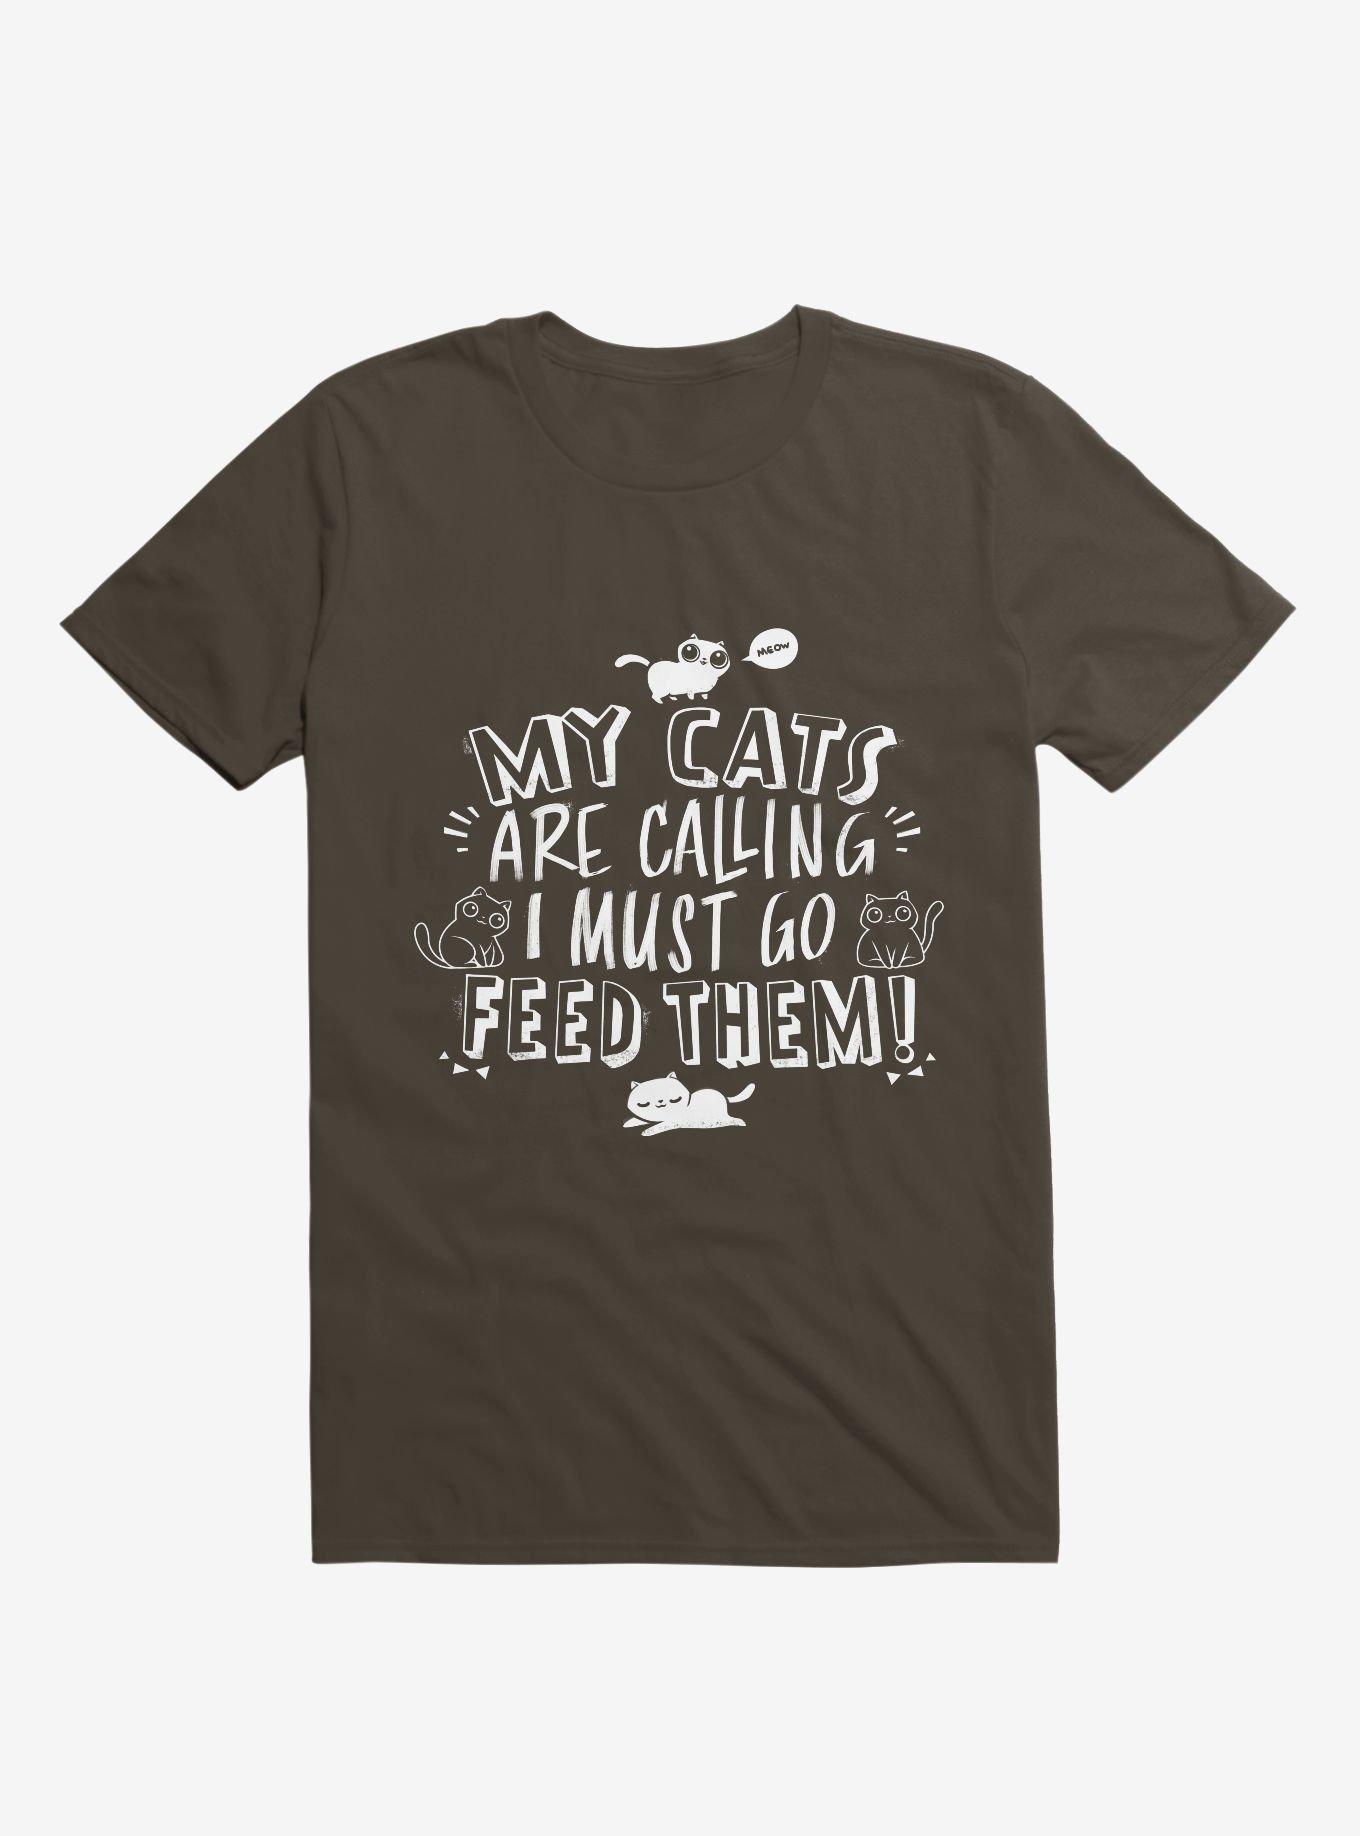 My Cats Are Calling And I Must Go Feed Them T-Shirt, BROWN, hi-res